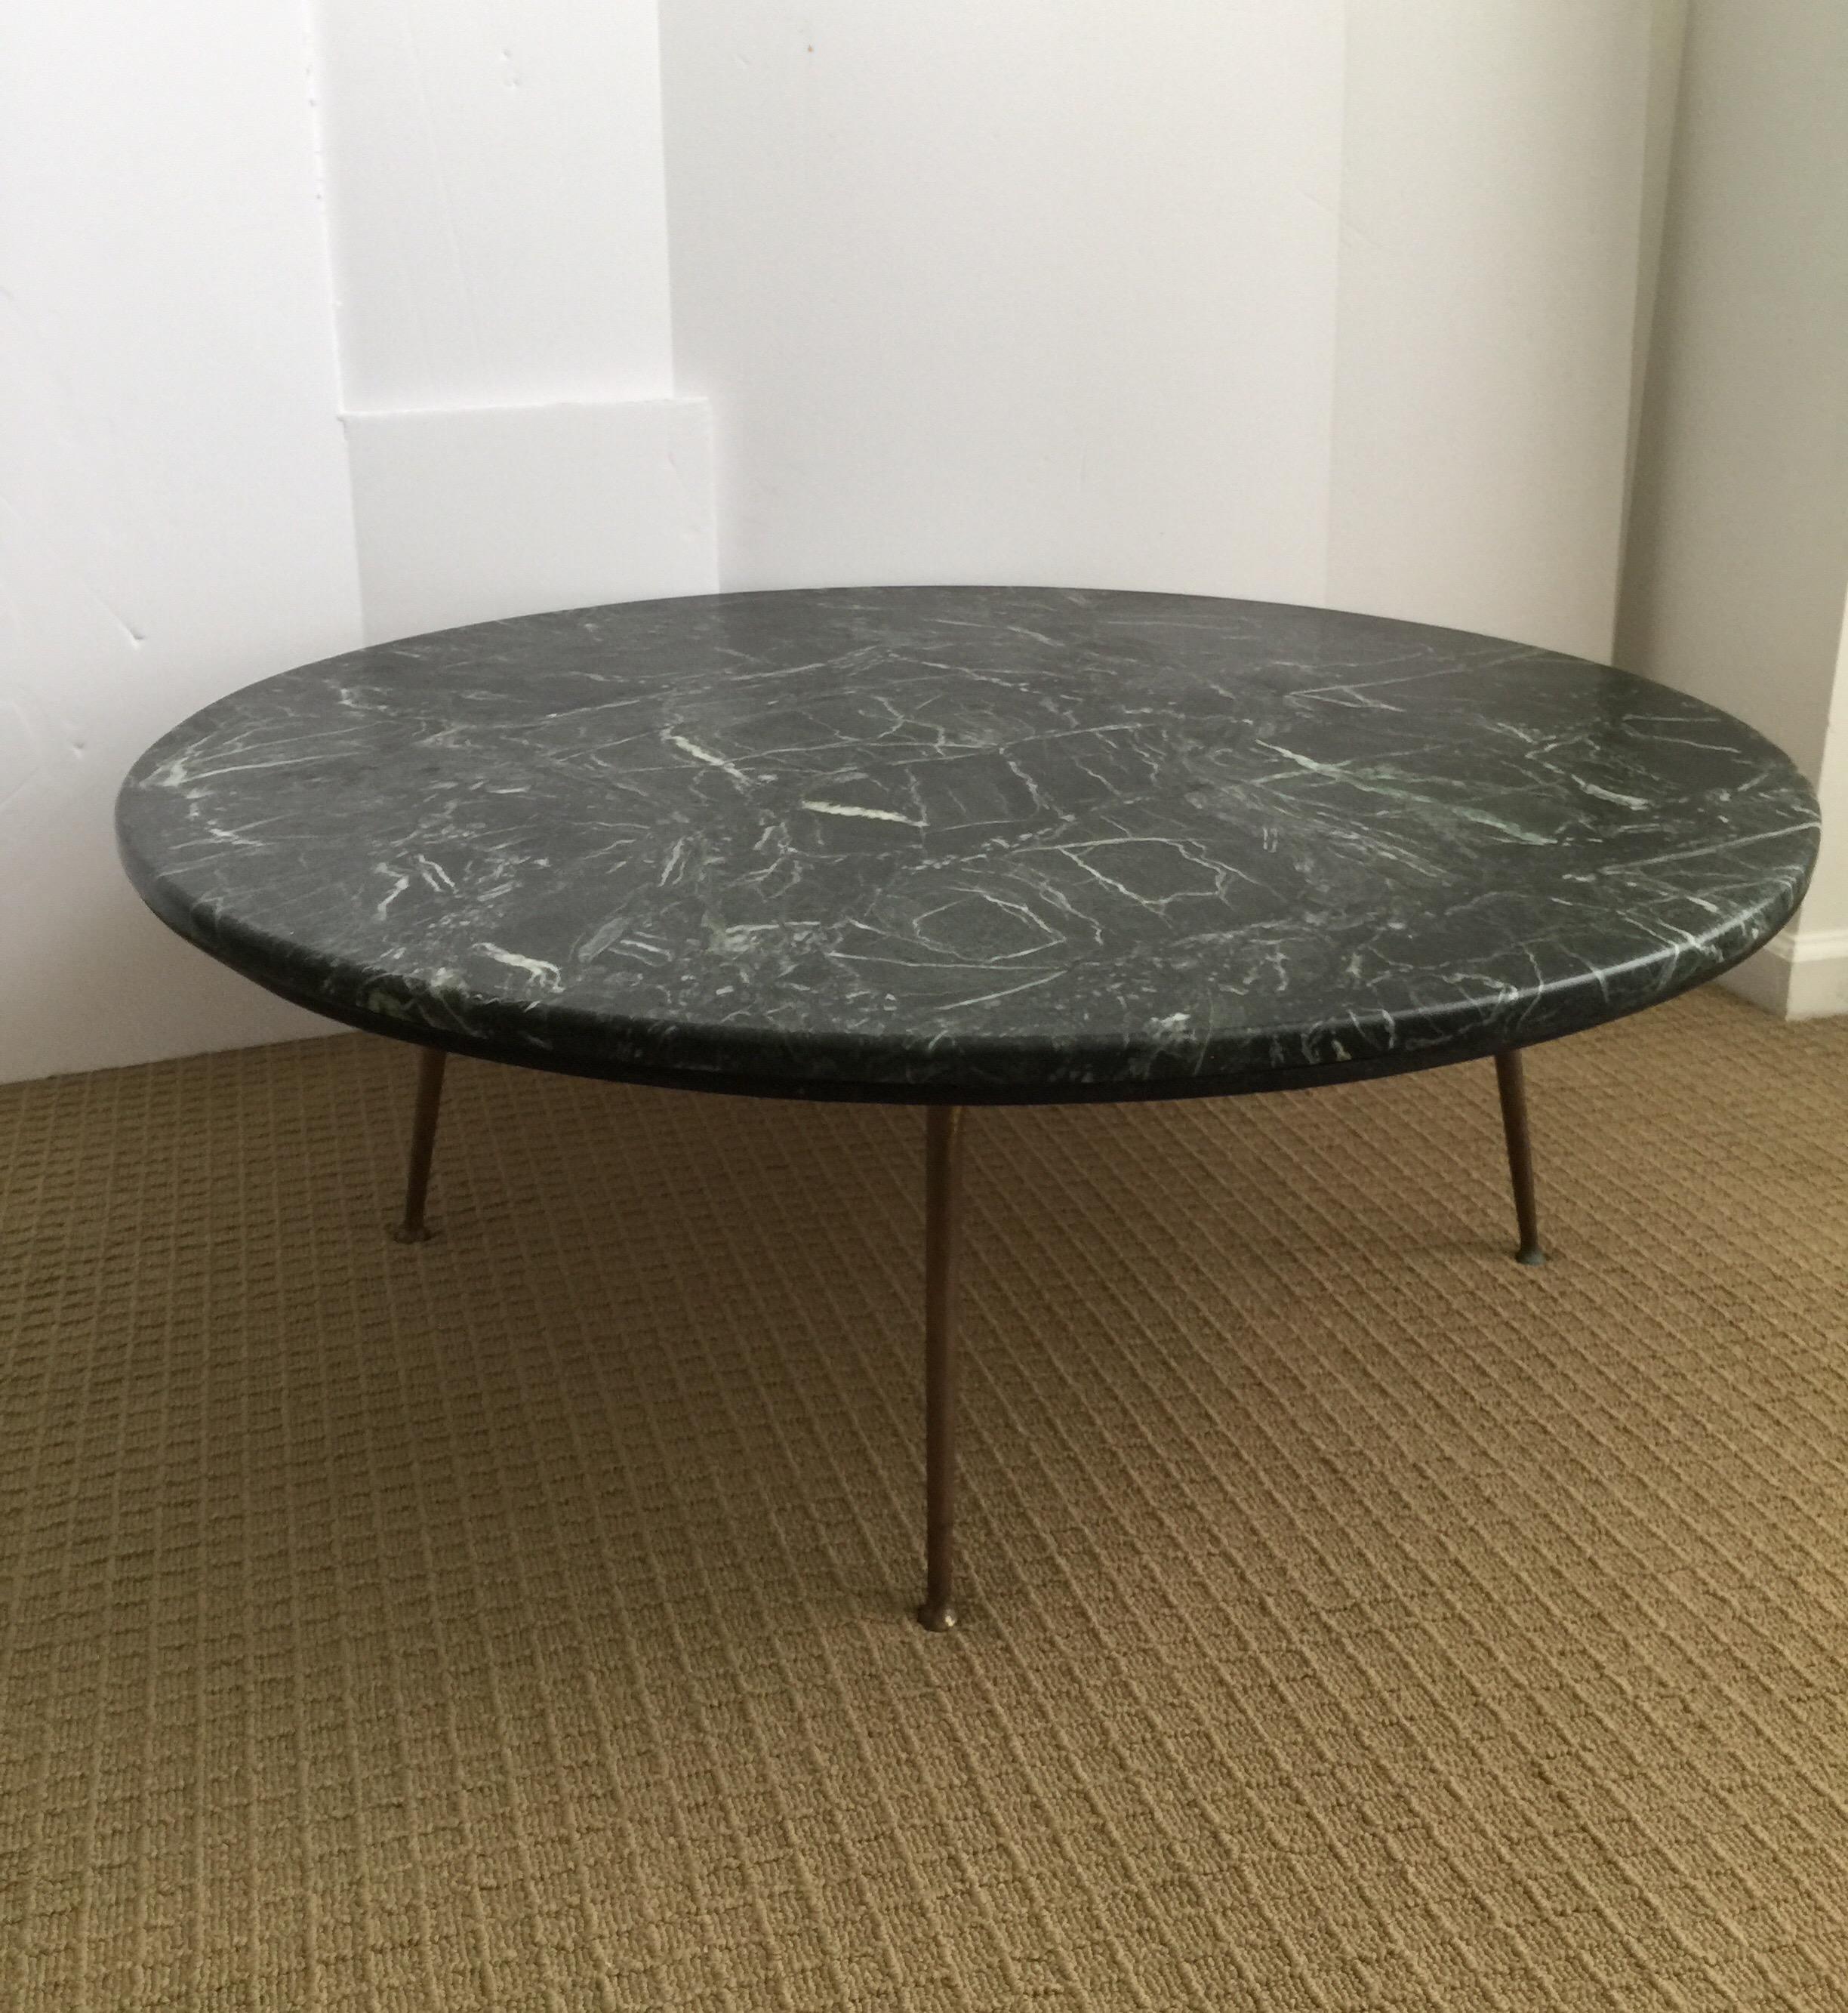 Large round Mid-Century Modern marble coffee table with brass or bronze metal legs. This sleek cocktail table features a marble top with black, white, and deep green tones. Marble sits on top of a wood base and is removable. Minimalist atomic era